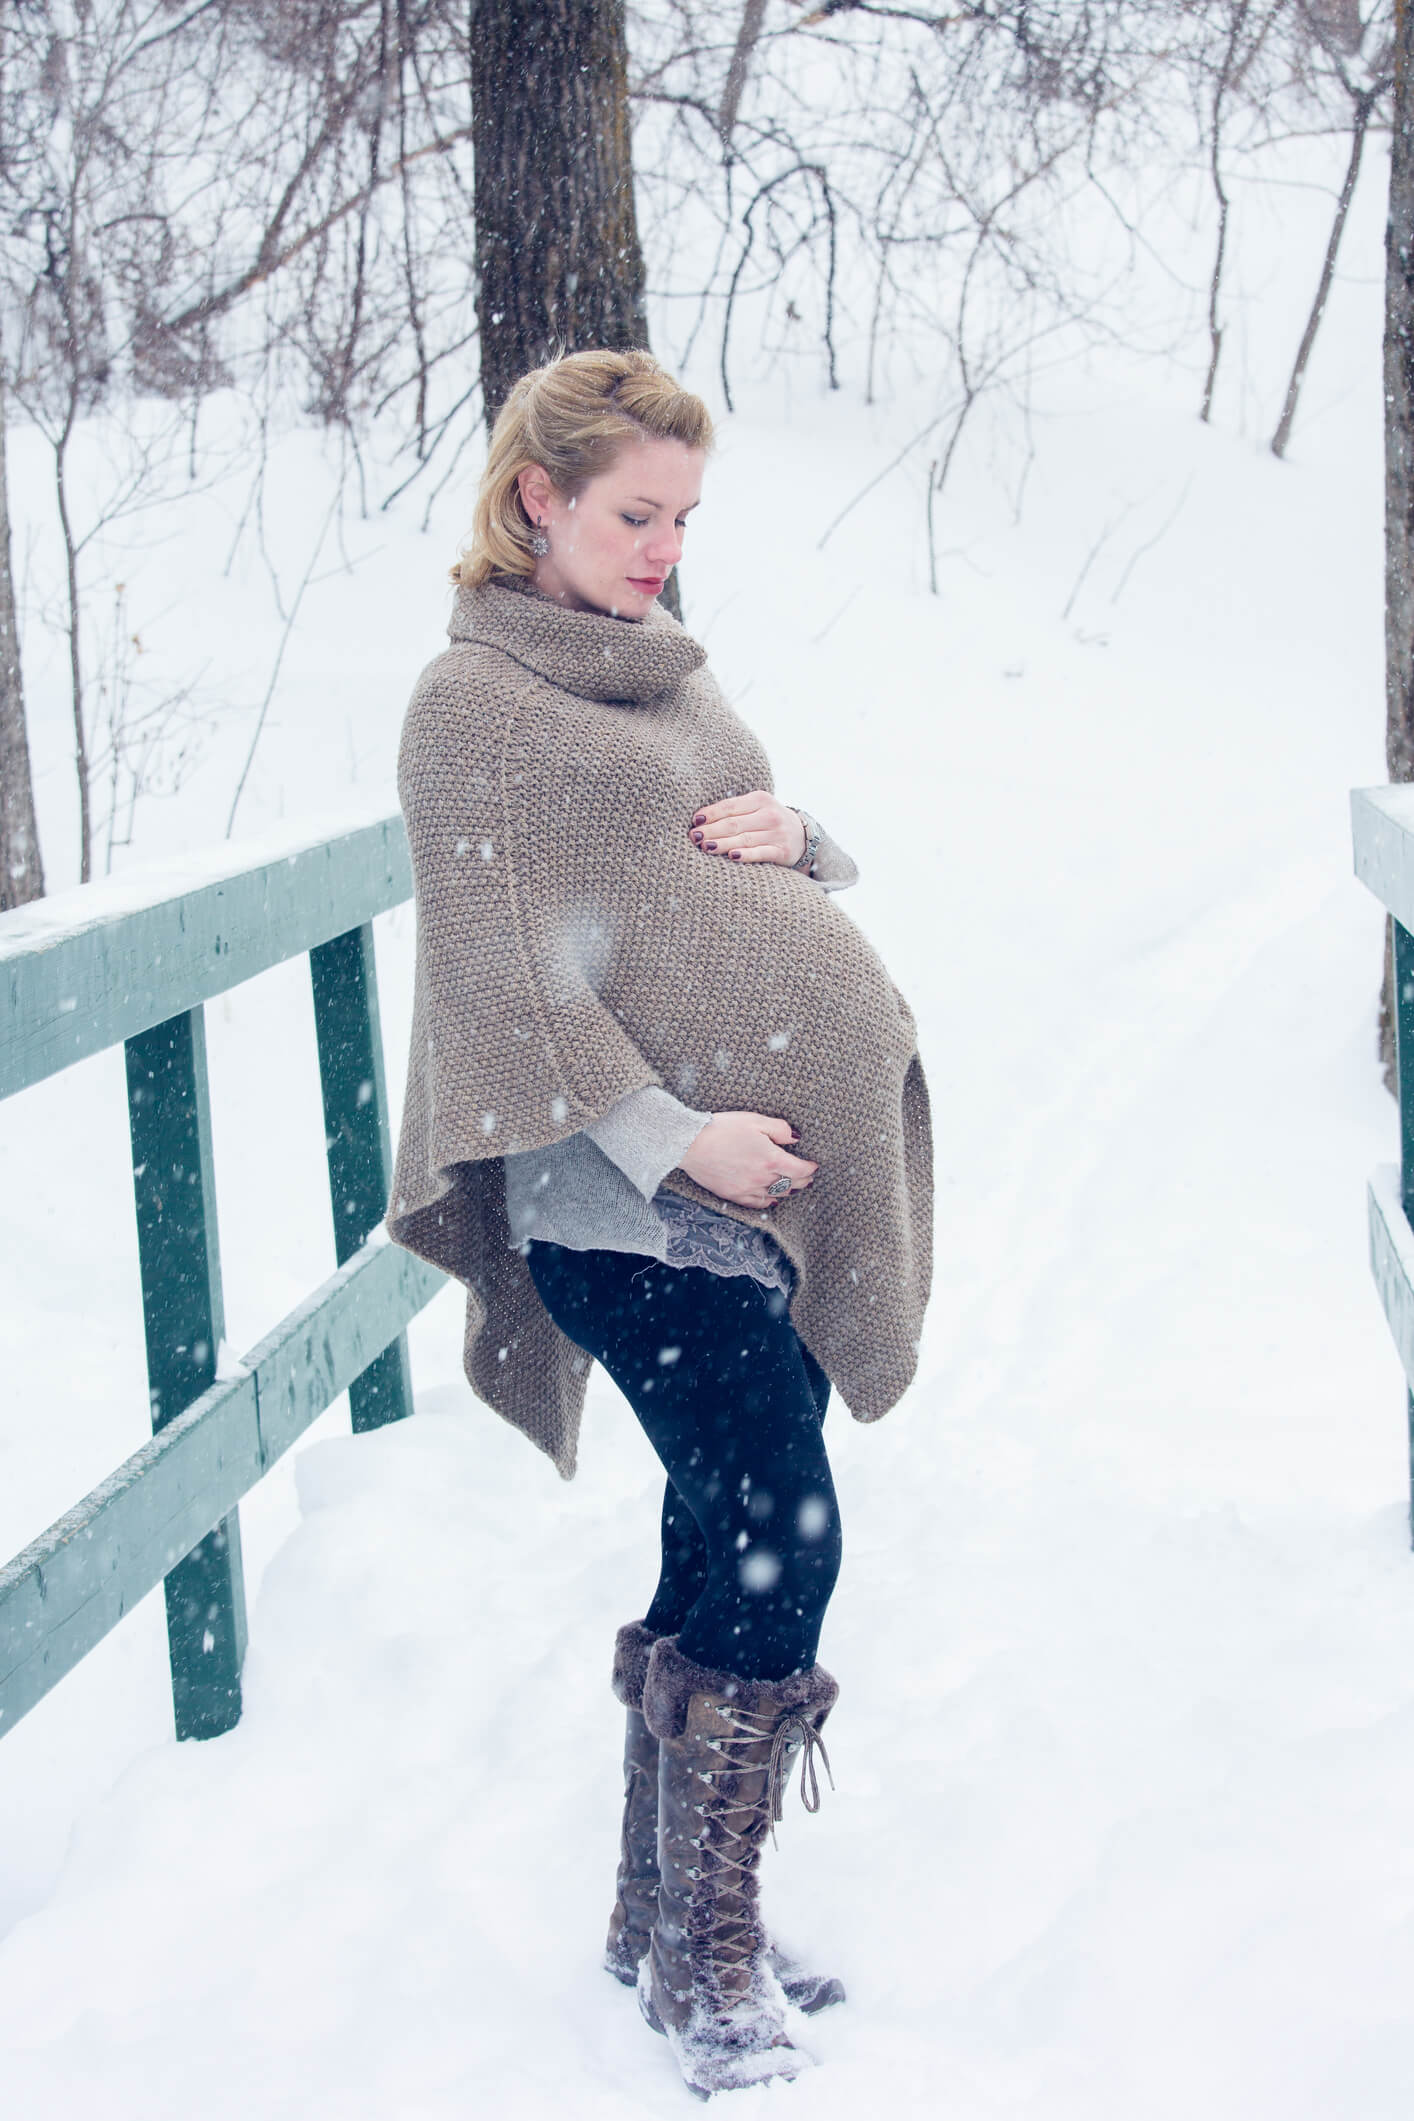 Pregnant lady standing in snow in woolly poncho